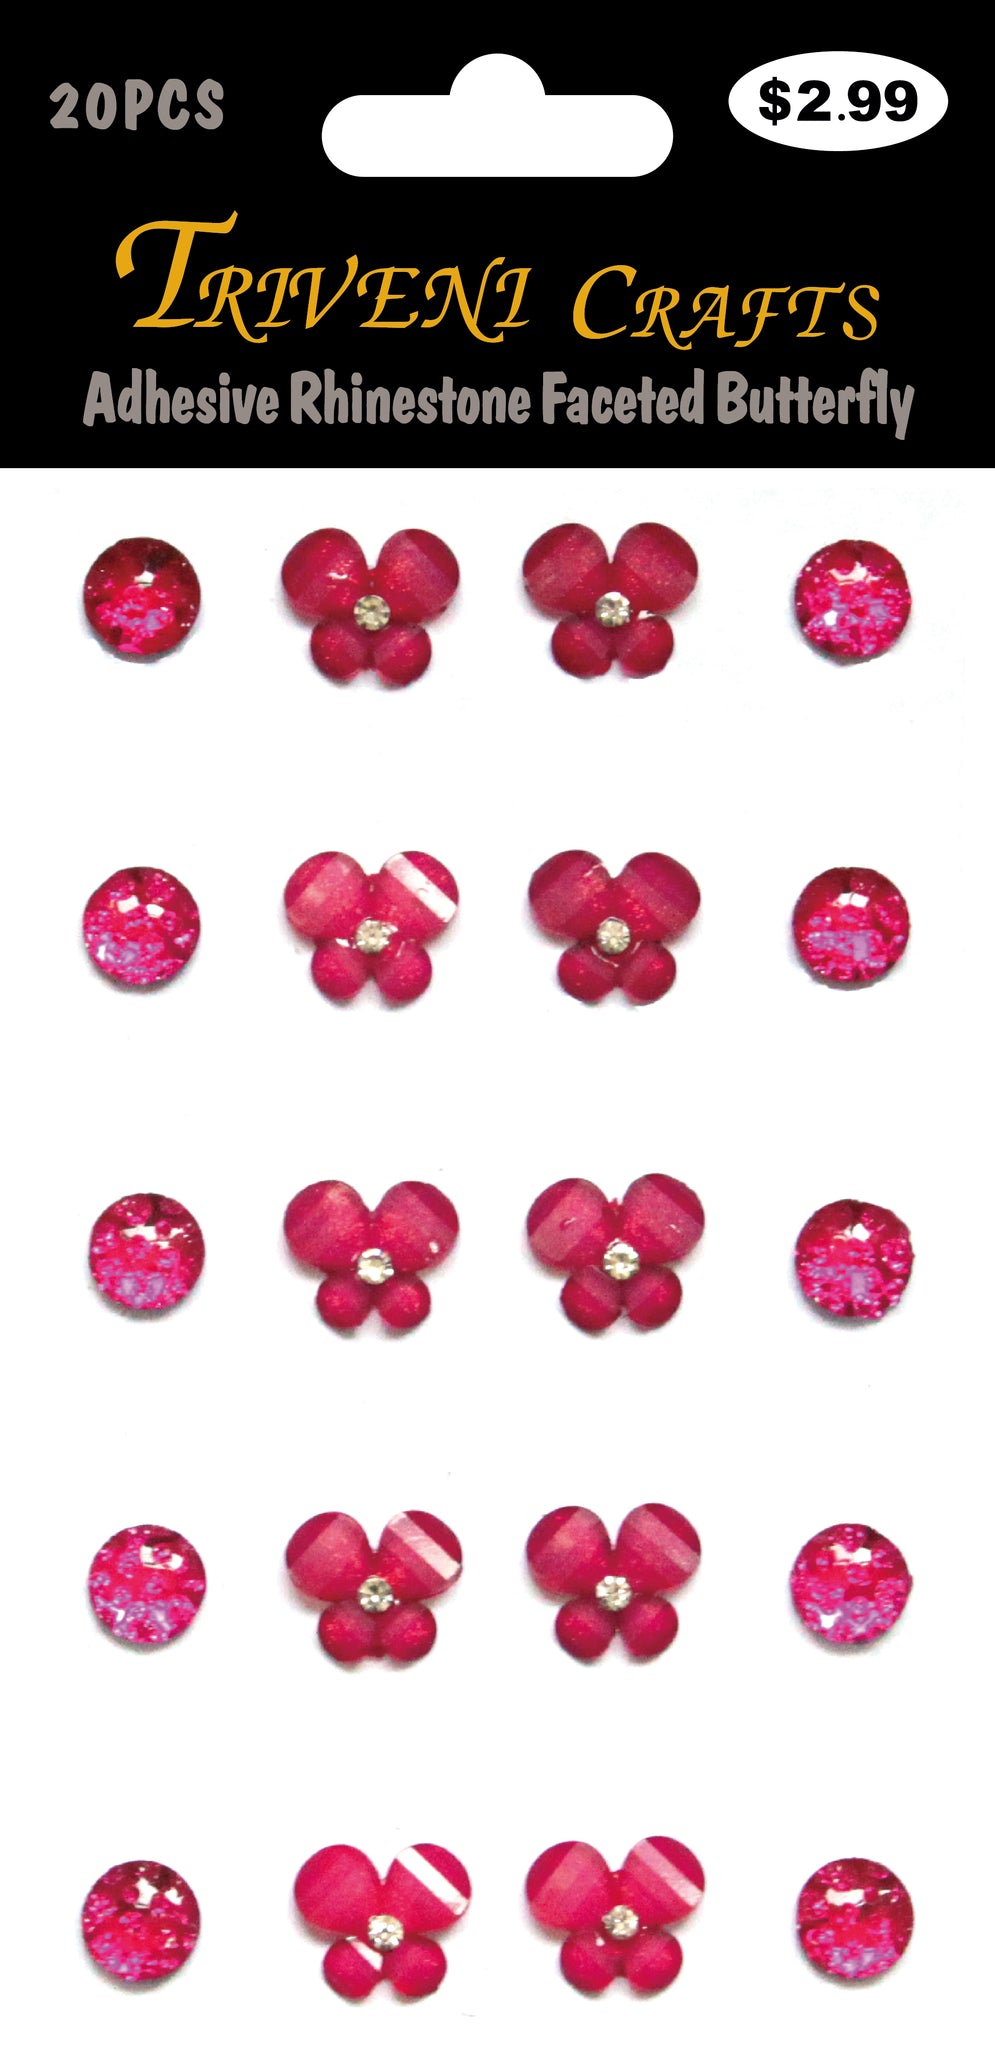 Adhesive Rhinestone Faceted Butterfly - Fuchsia